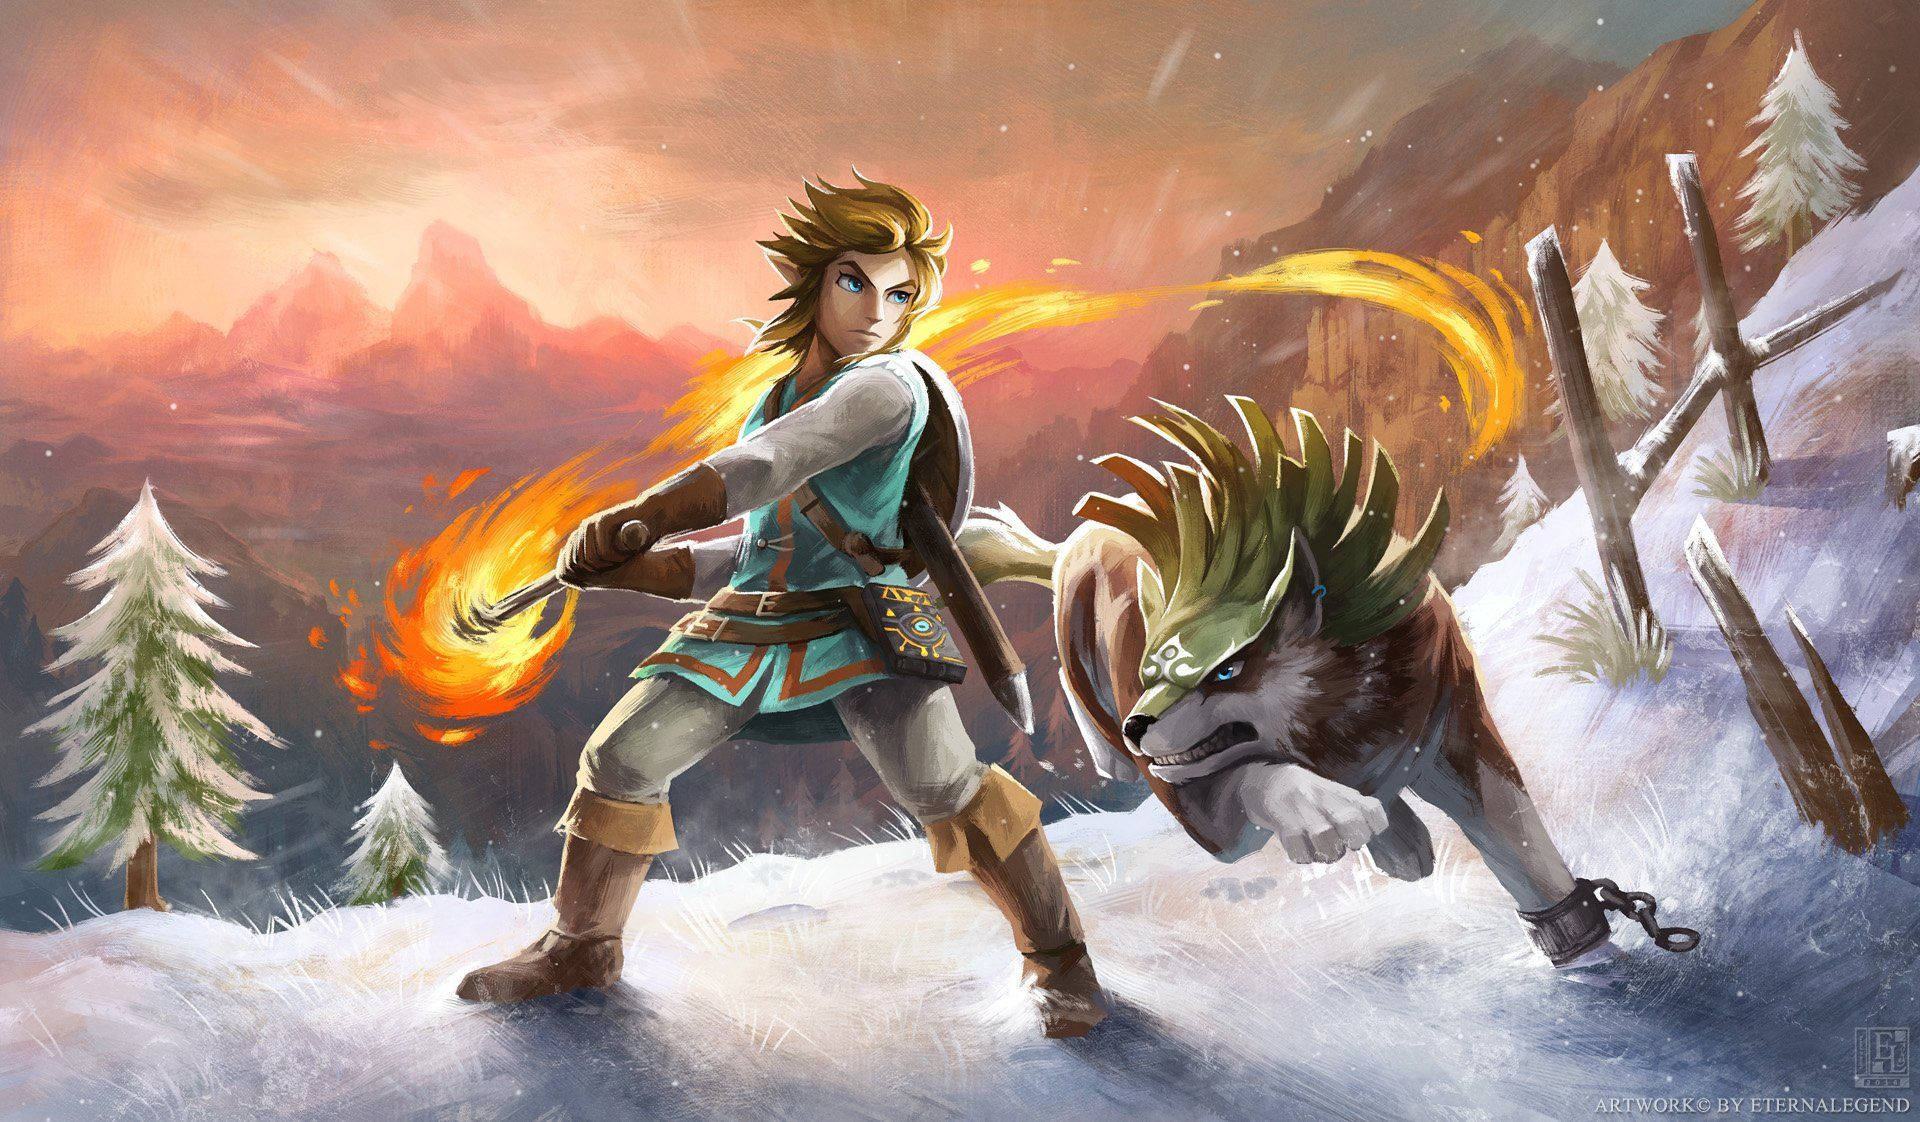 Link and Wolf in Breath Of The Wild Adventure Wallpaper